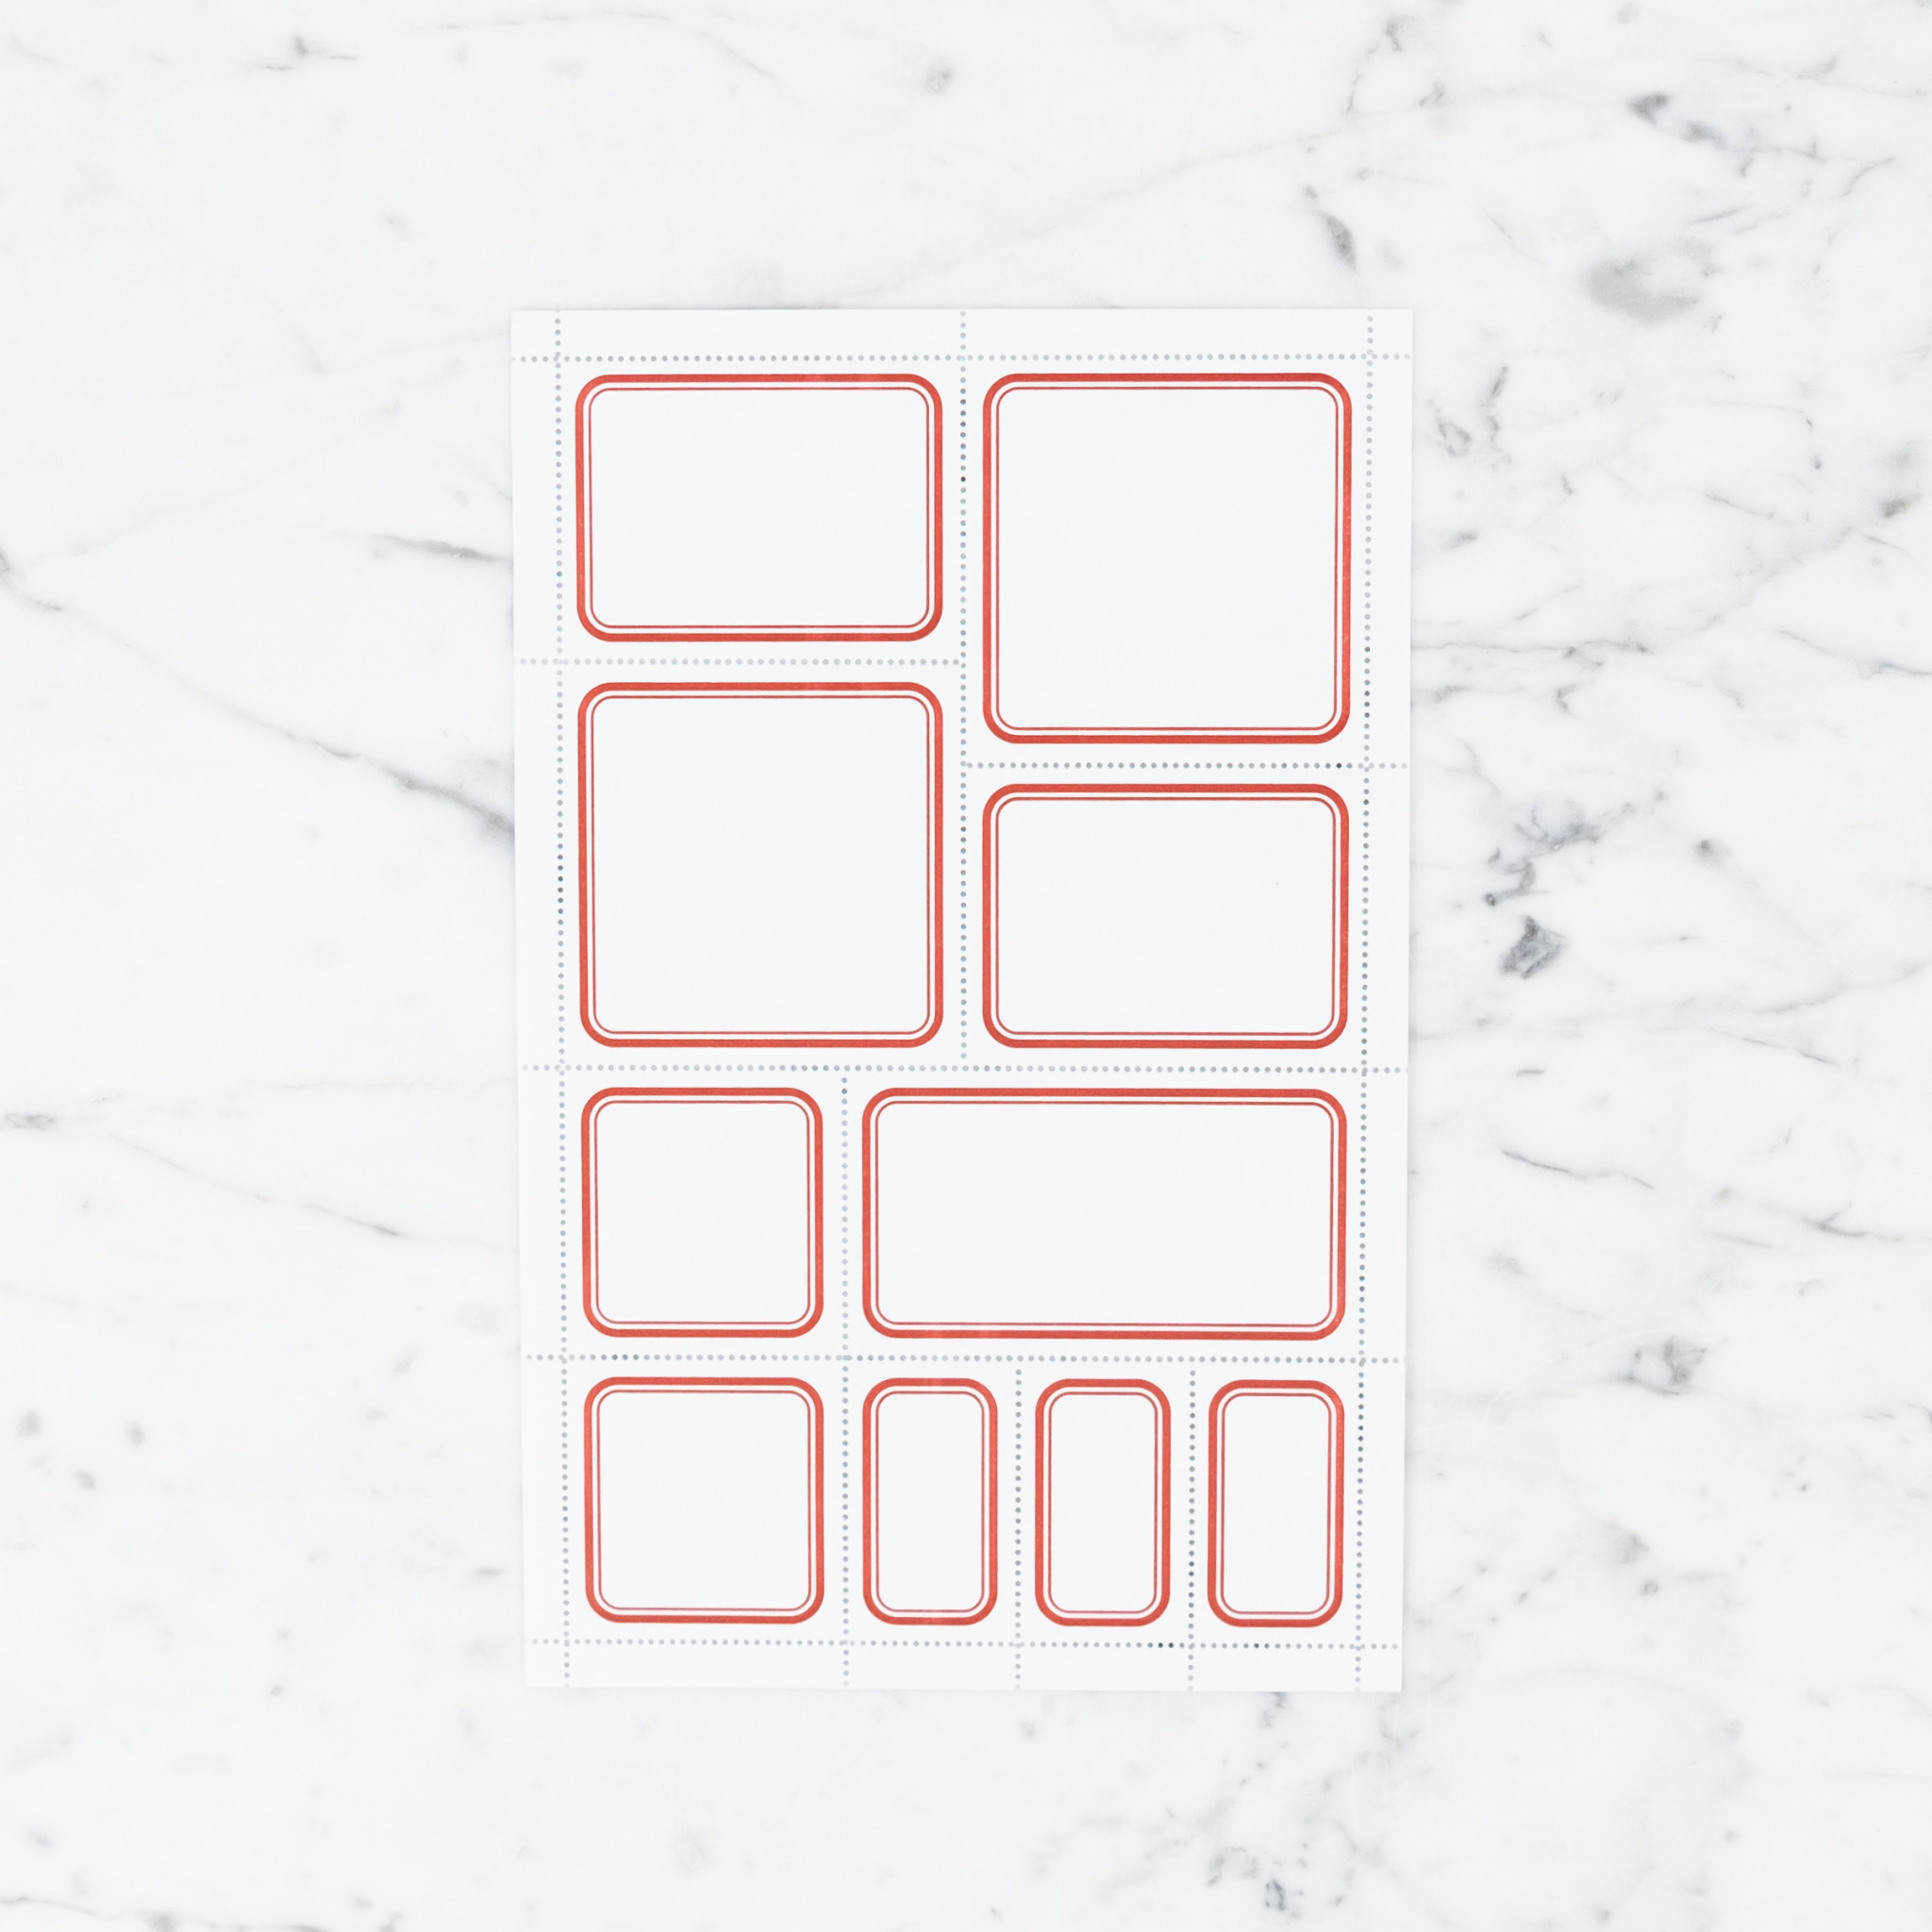 Blank Perforated Stamp Label Sheet - Red - Round Corners